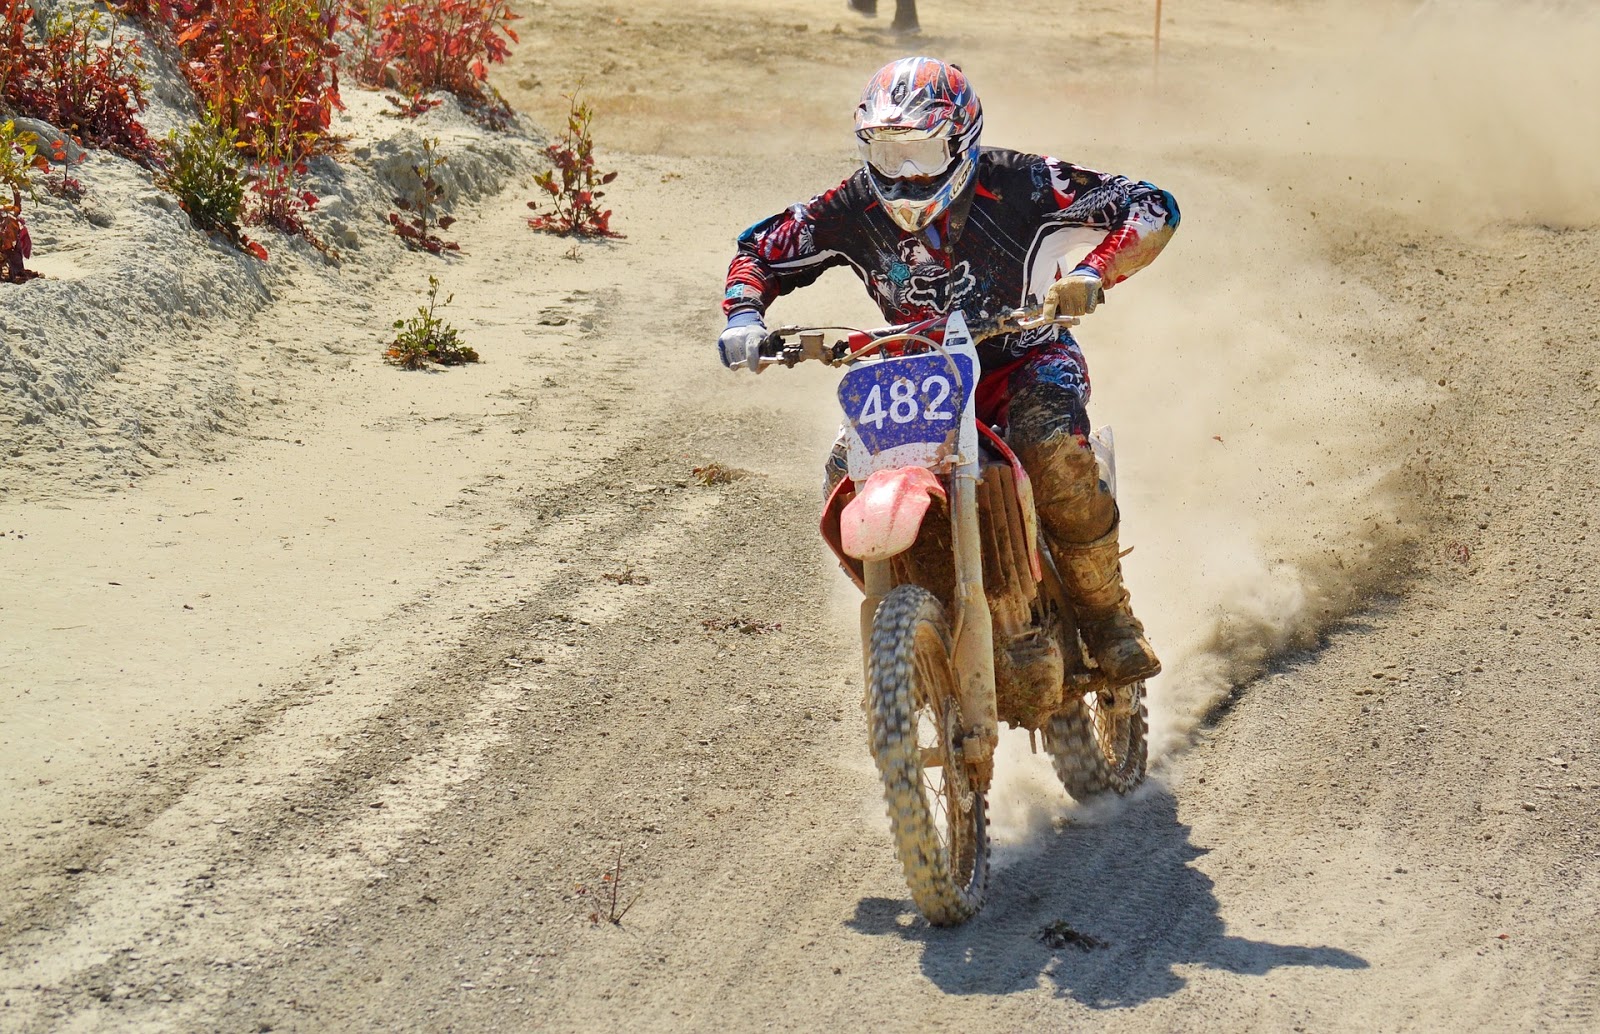 The Basics of Off-road Racing That All Bikers Should Know